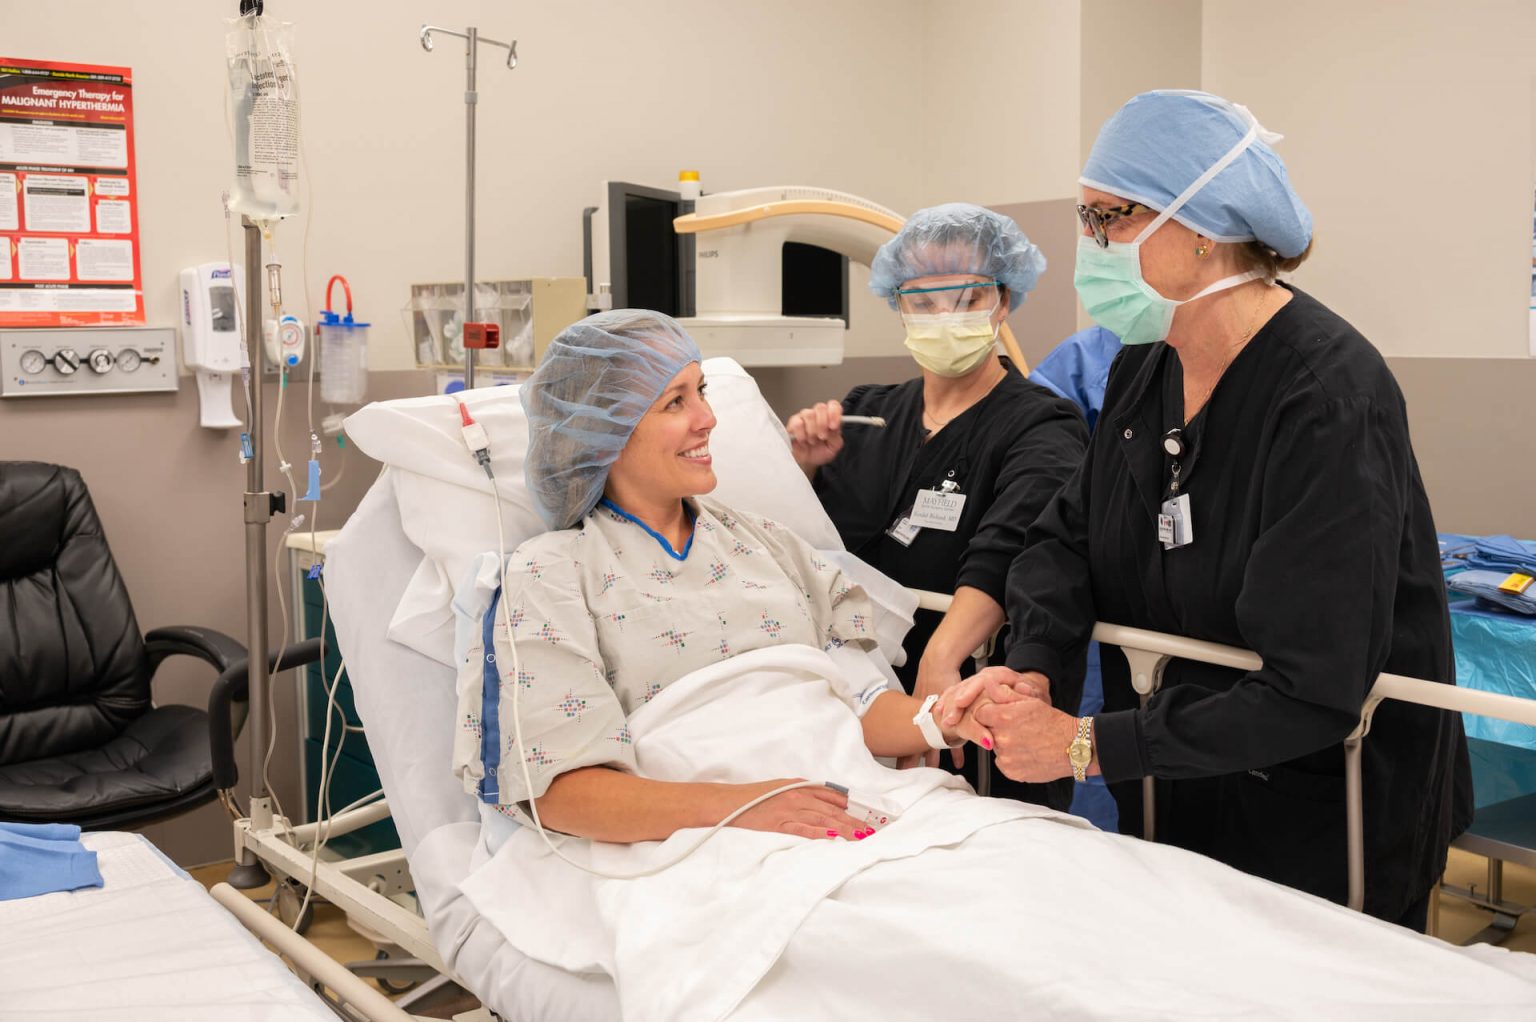 patient and her spine surgery team prepare for surgery